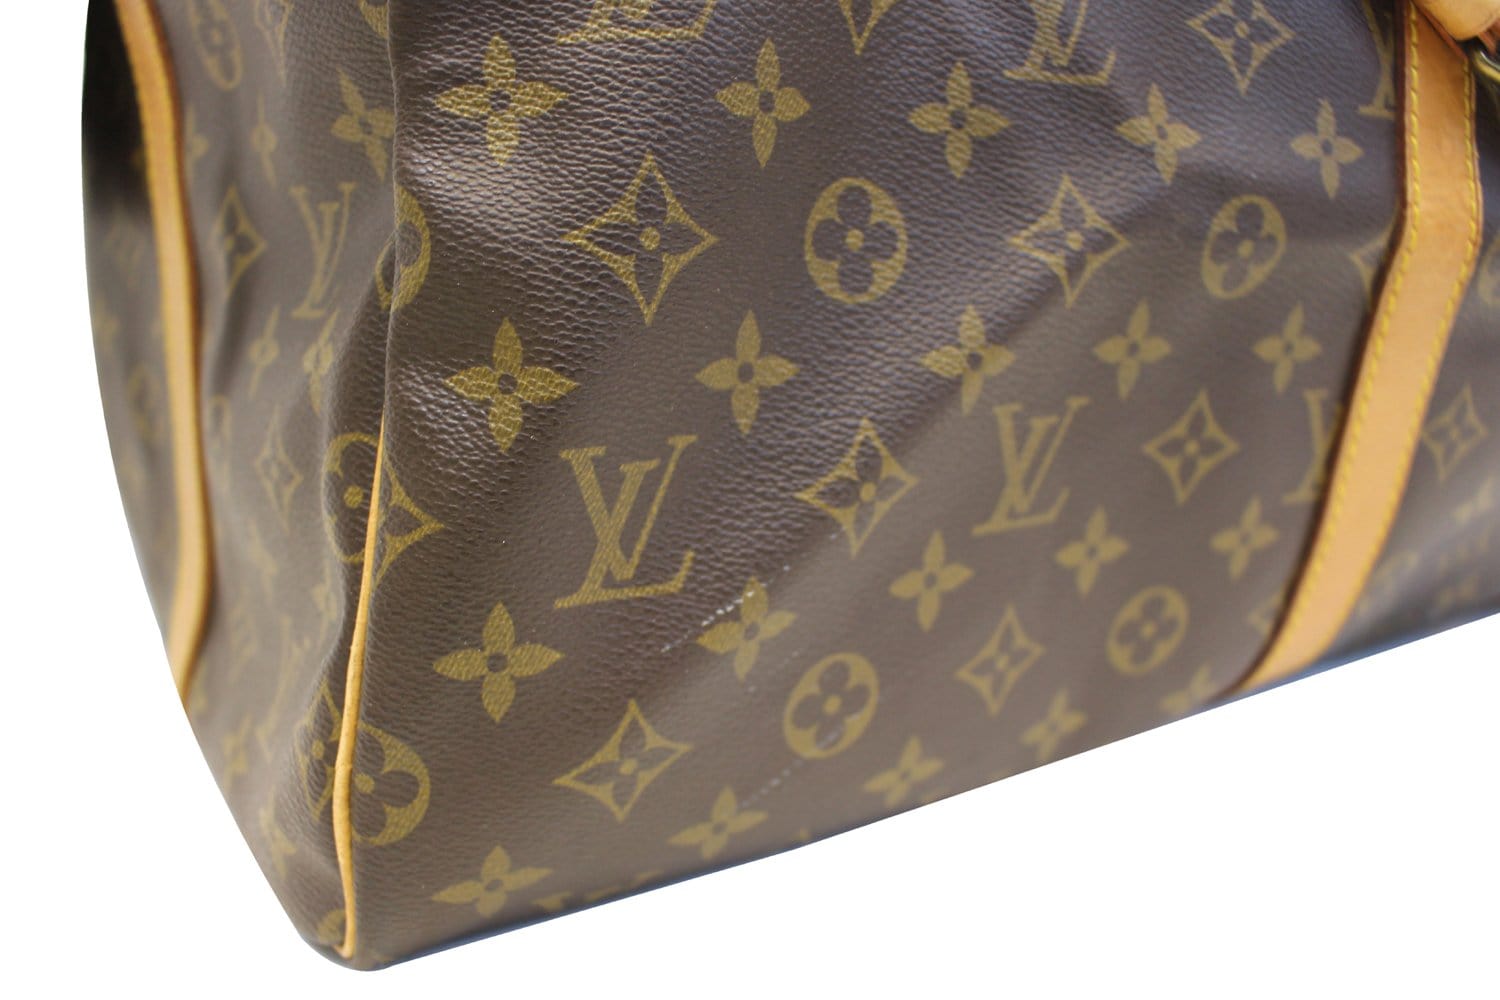 Louis Vuitton Monogram Keepall Bandouliere 55 Boston Duffle Bag with Strap  For Sale at 1stDibs